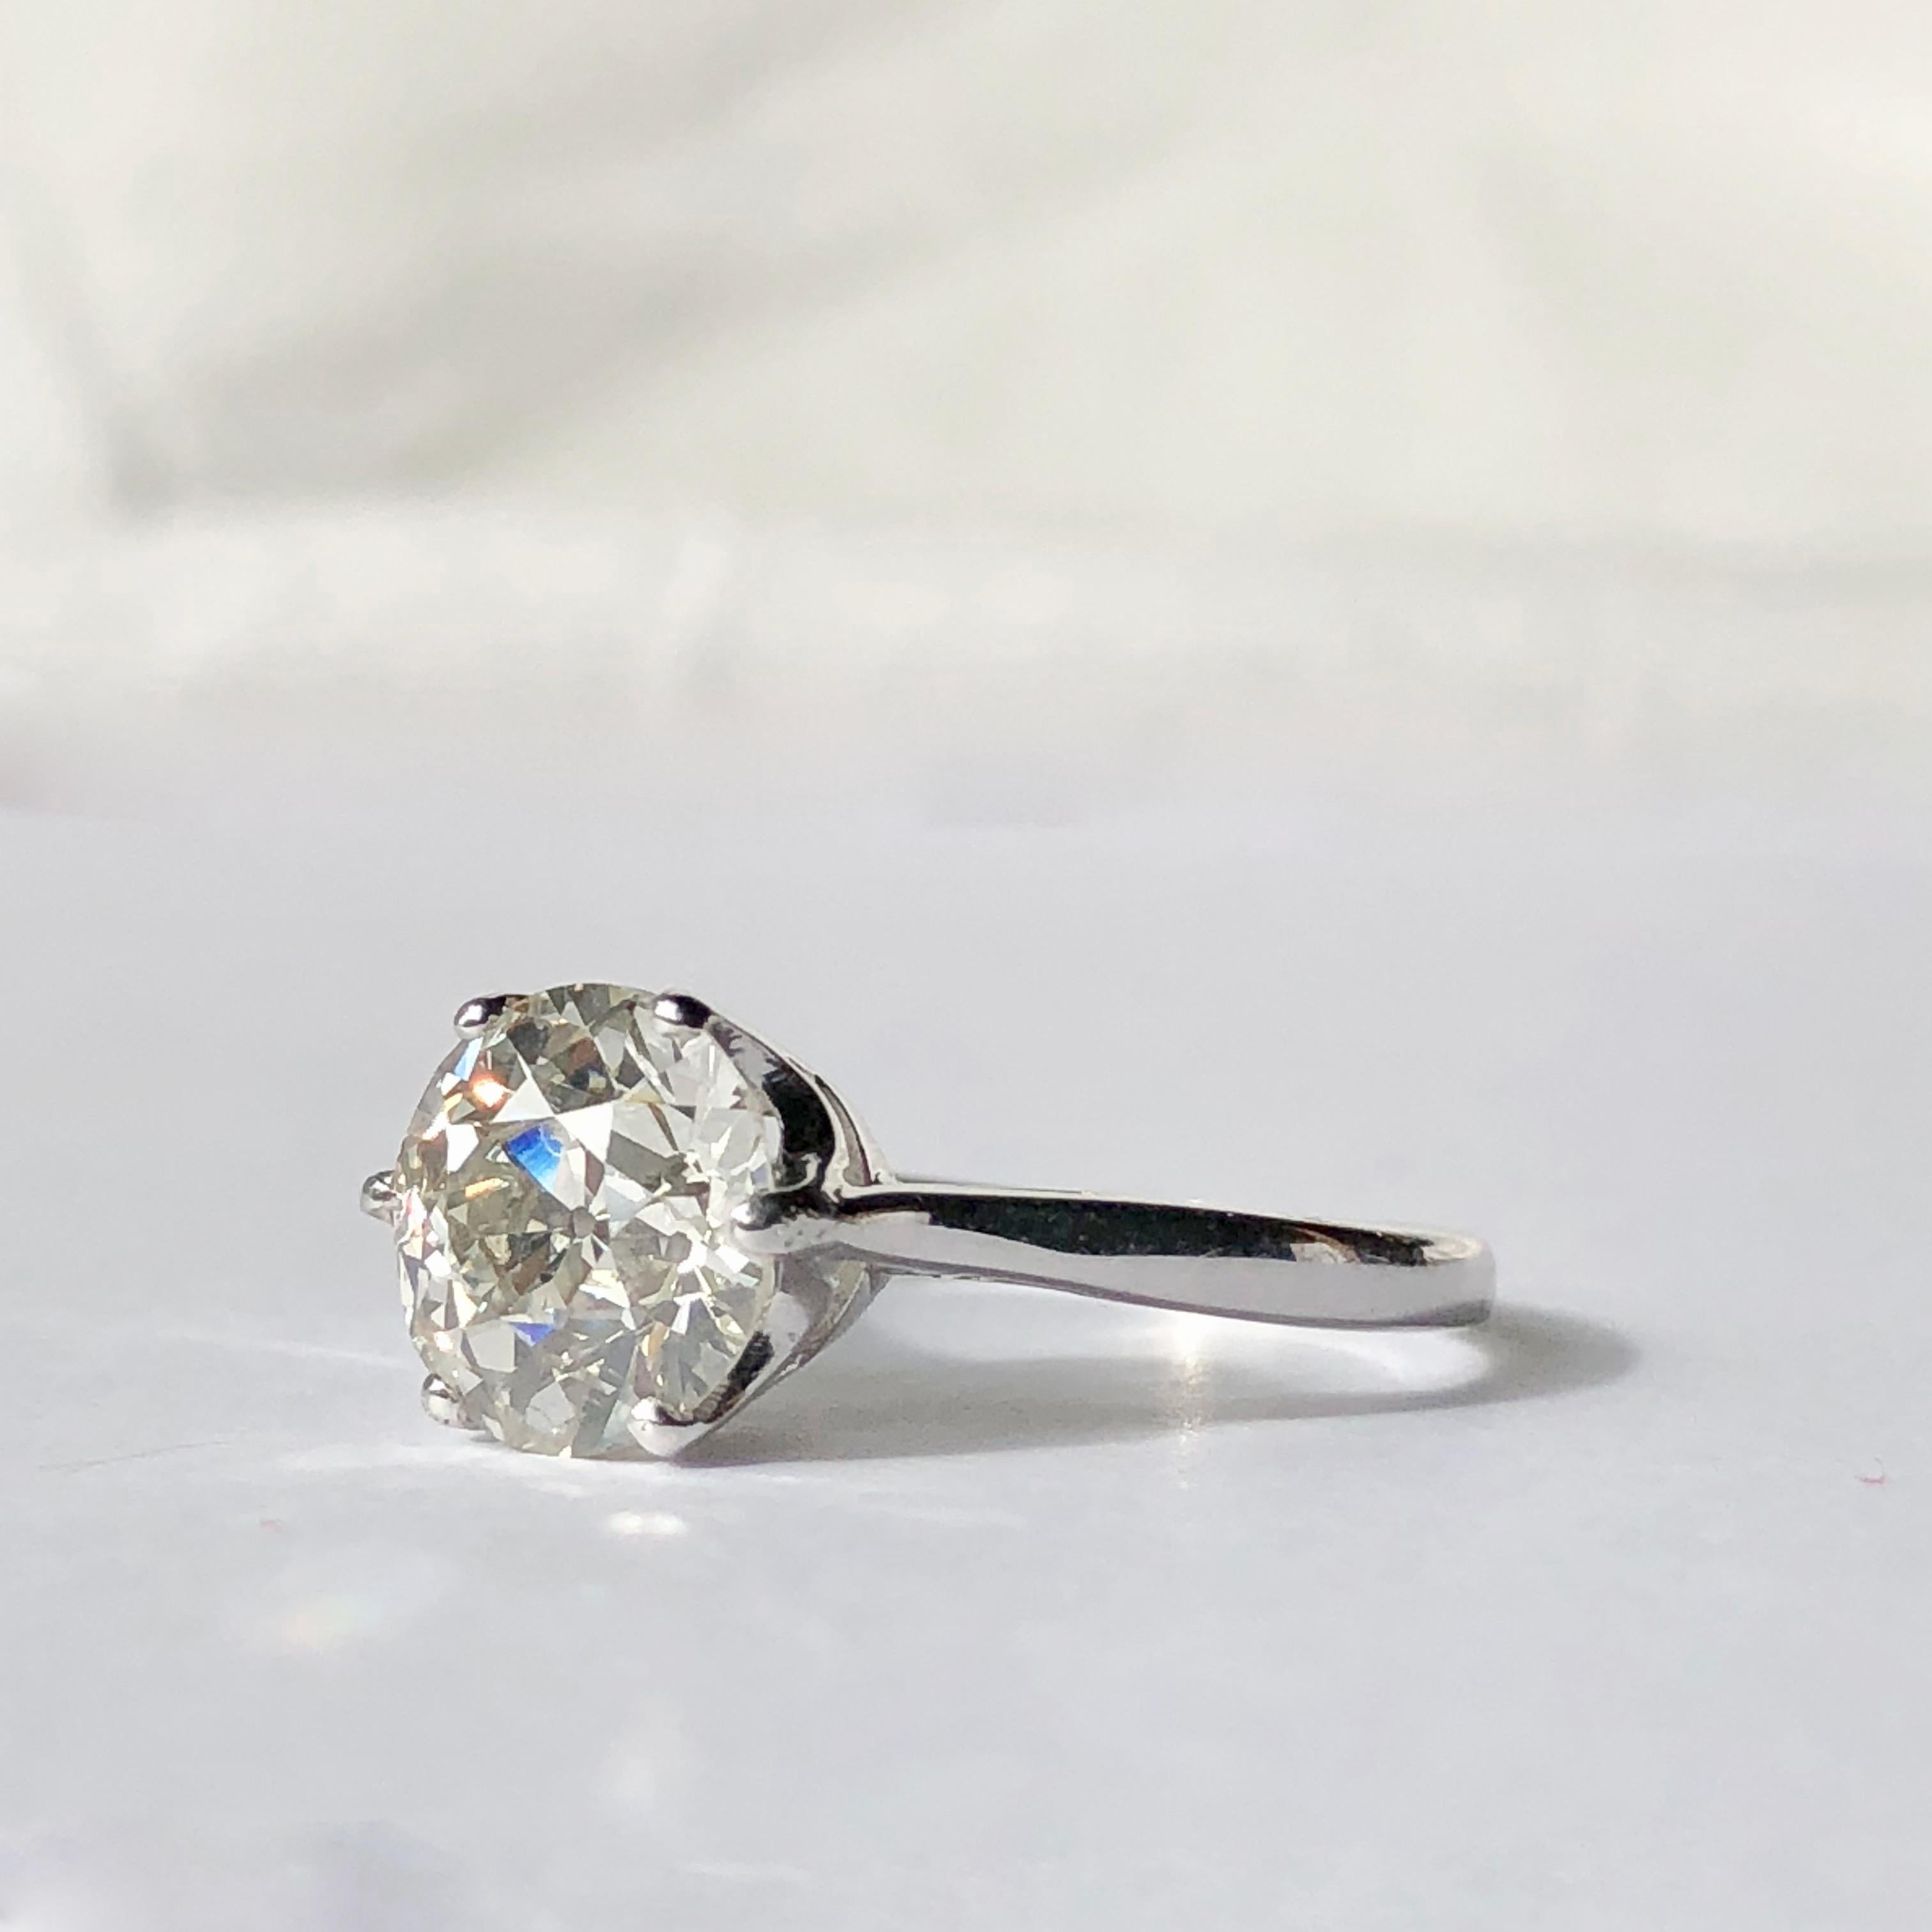 Vintage Diamond Solitaire Engagement Ring 

A Classic diamond solitaire - such a perfect way to say I love you ' will you marry me'

Such an exquisite diamond ring will never go out style and is a true investment for future generations

This 2.35ct